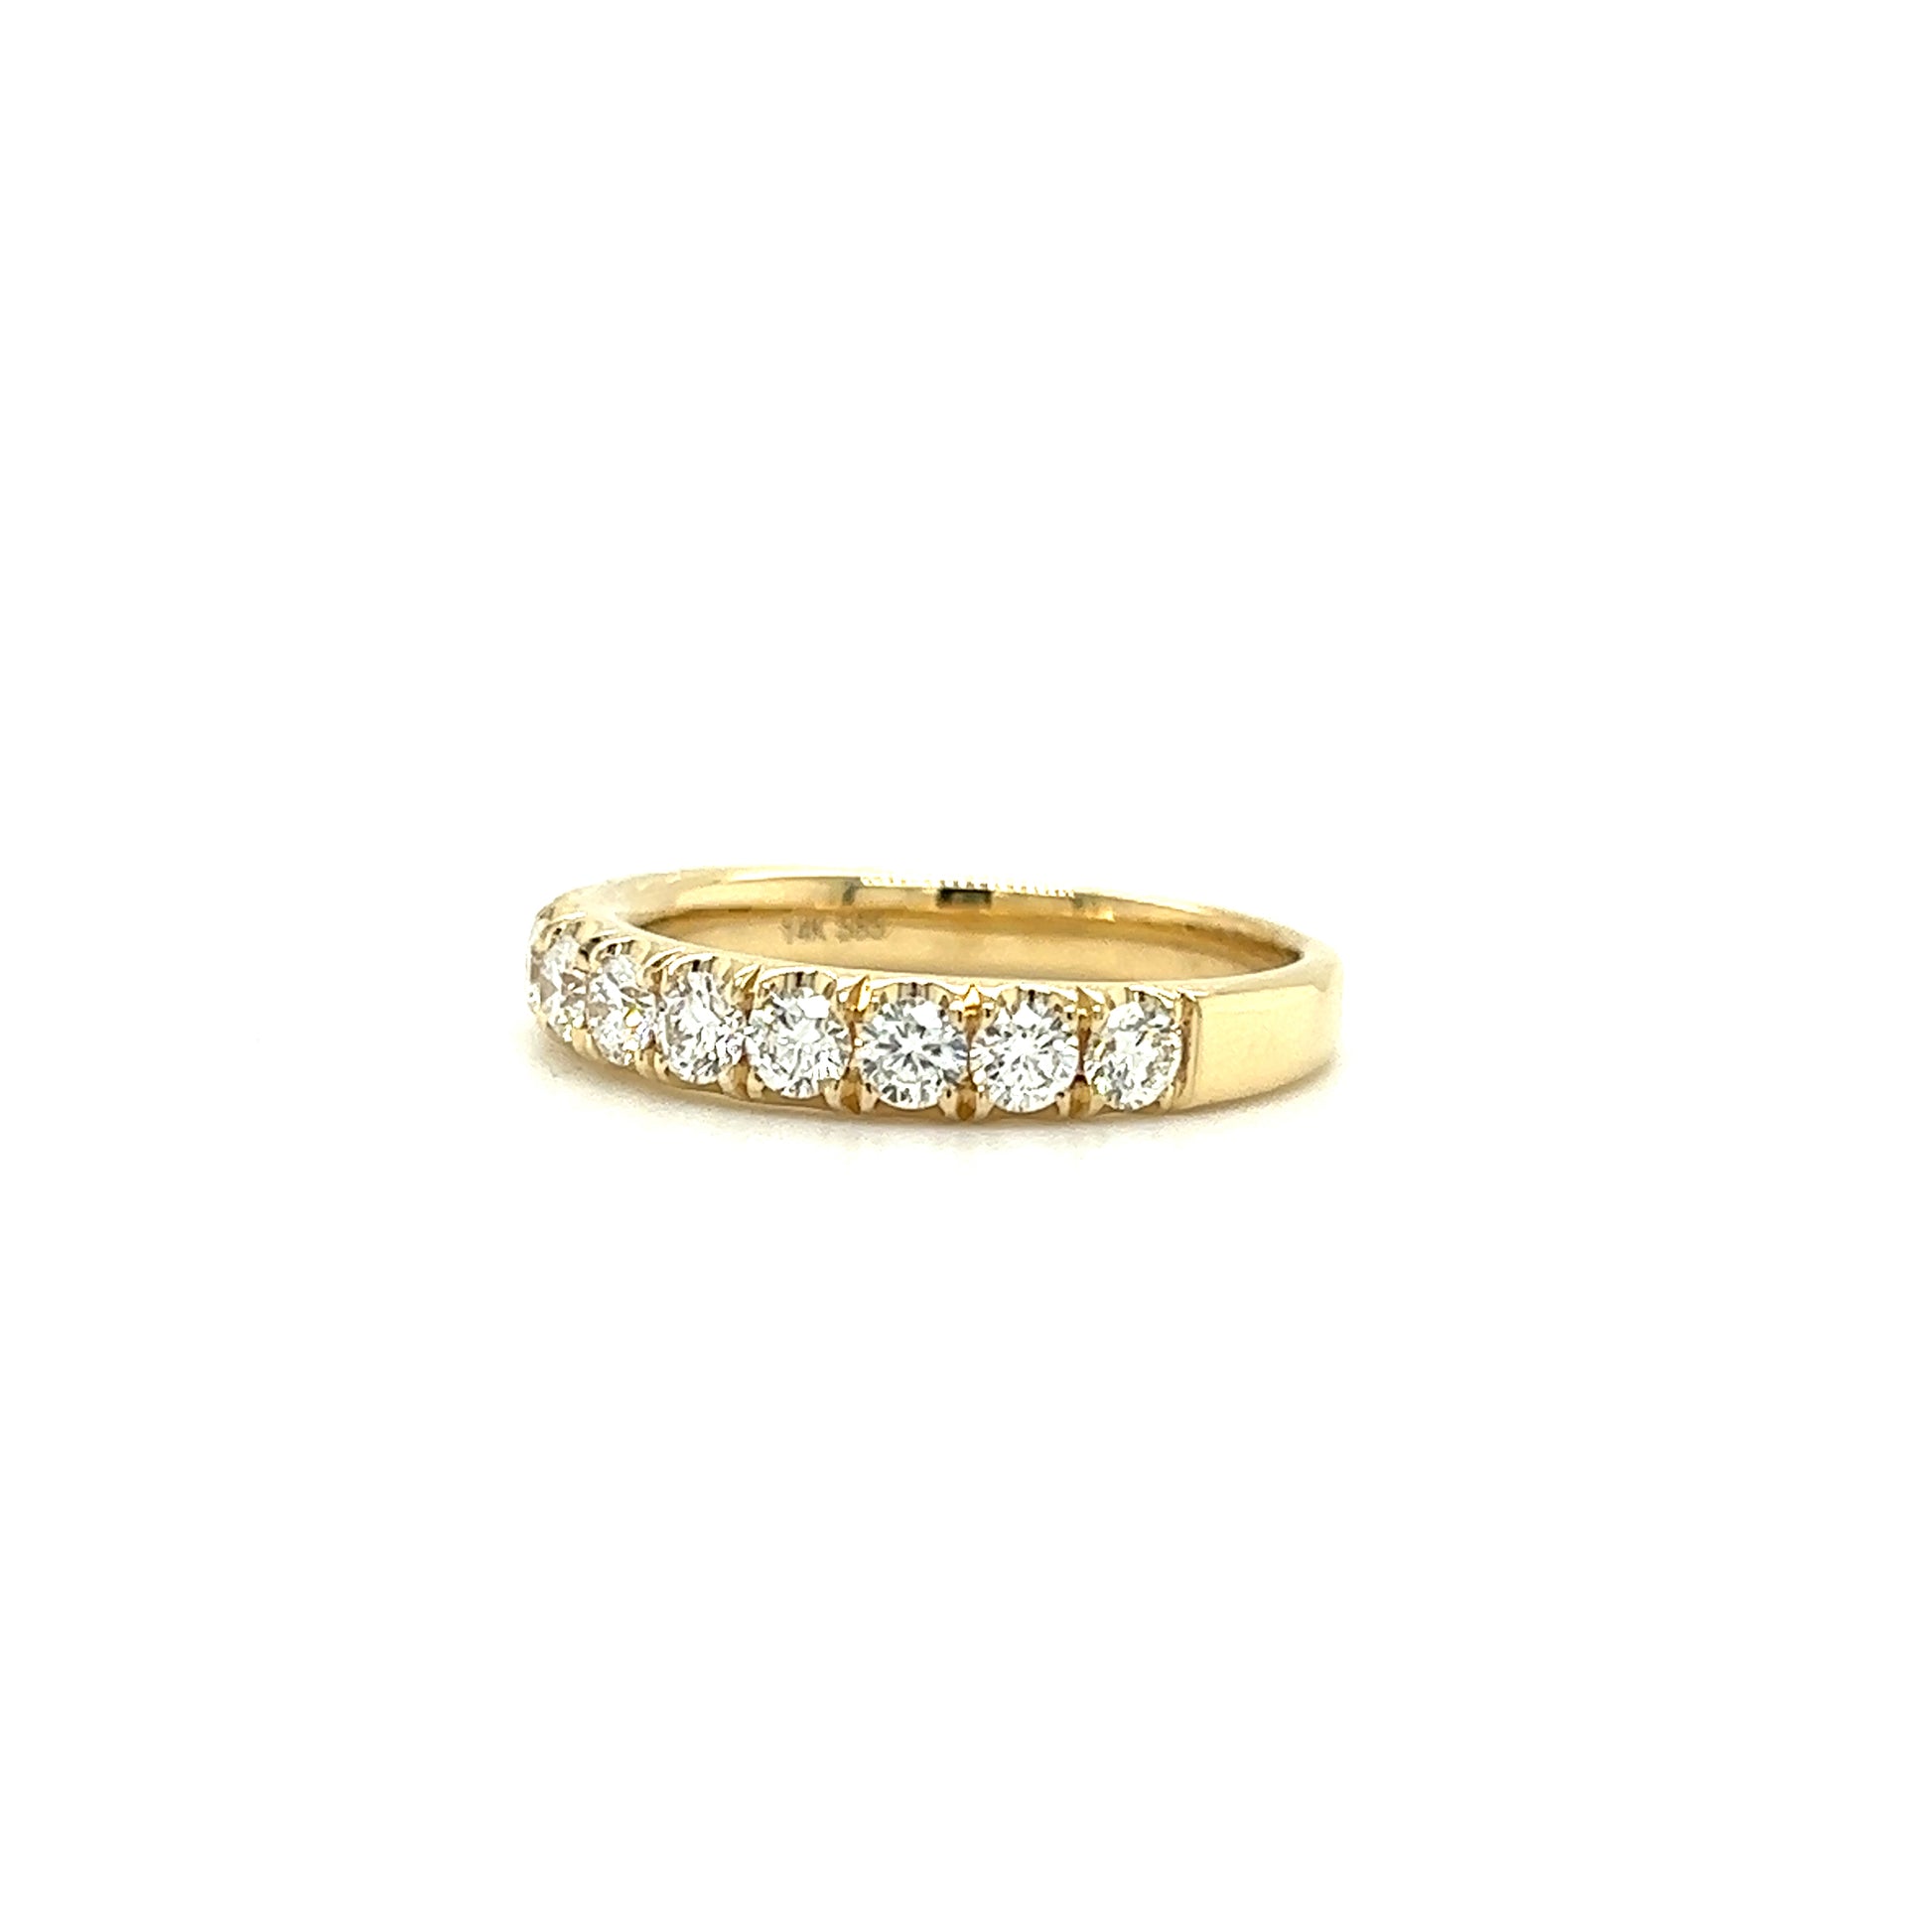 Diamond Ring with 0.86ctw of Diamonds in 14K Yellow Gold Right Side View